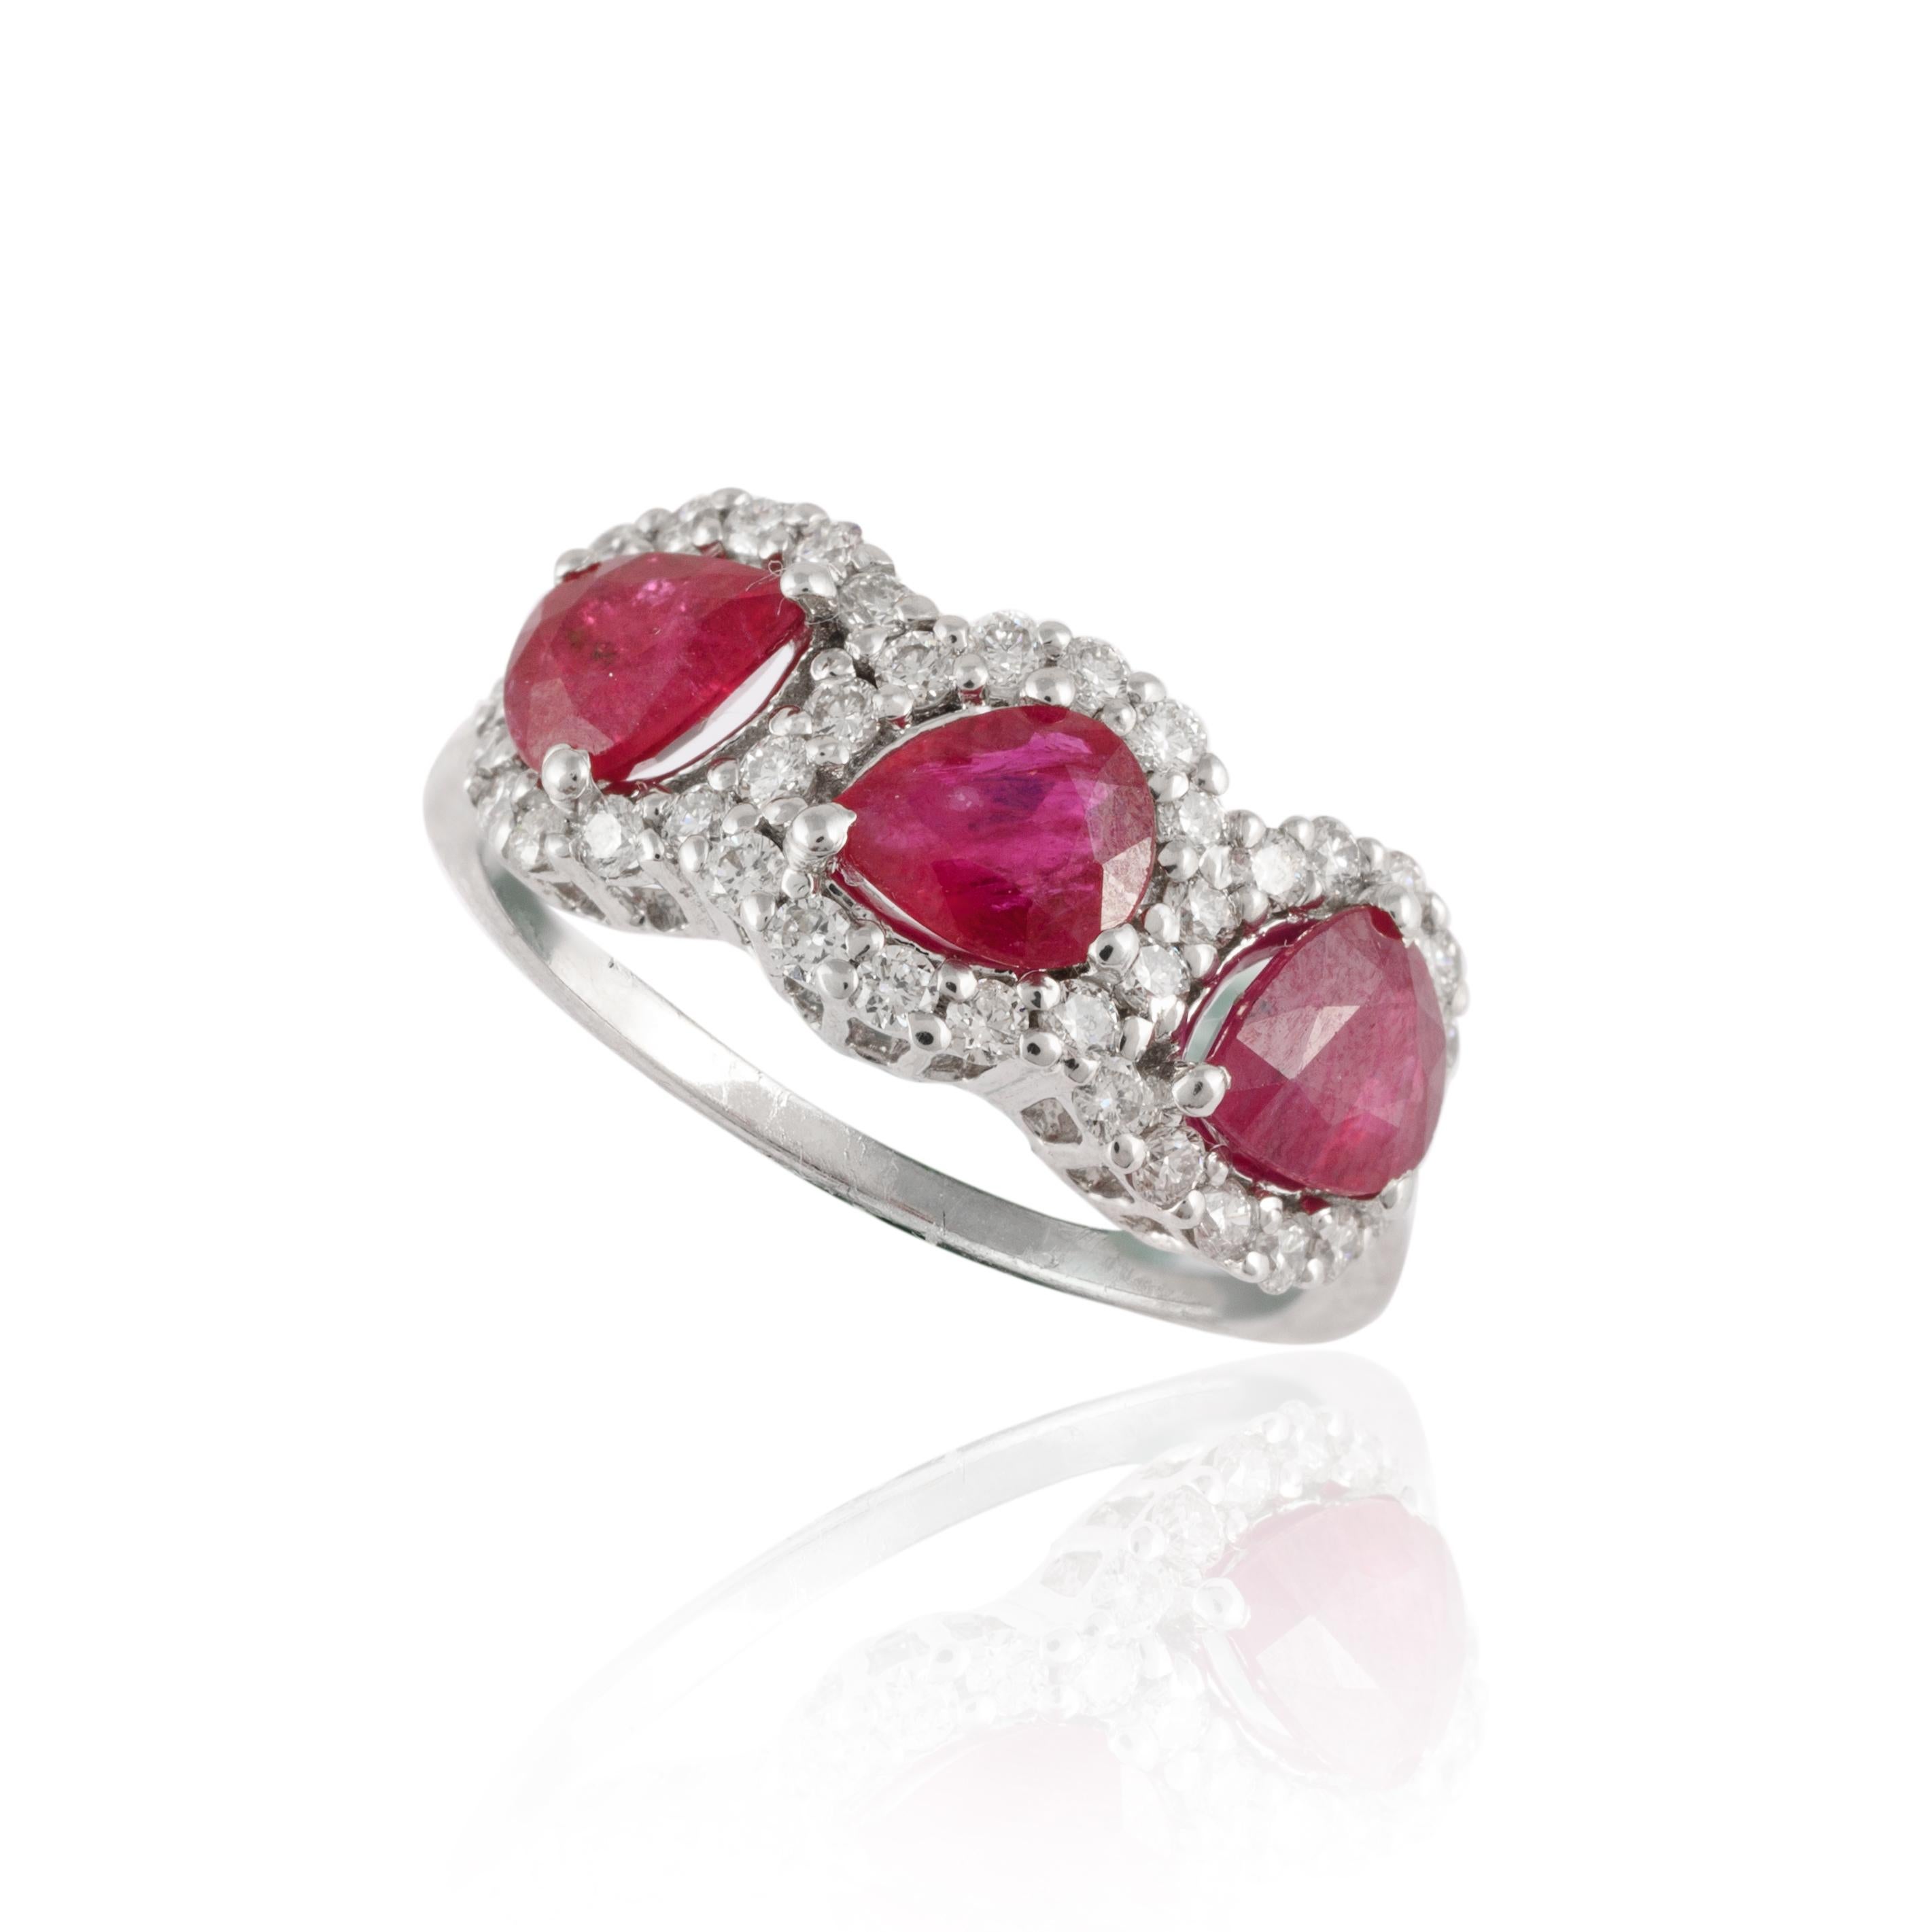 For Sale:  Three Stone Real Ruby Engagement Ring in 18k Solid White Gold with Diamonds 8